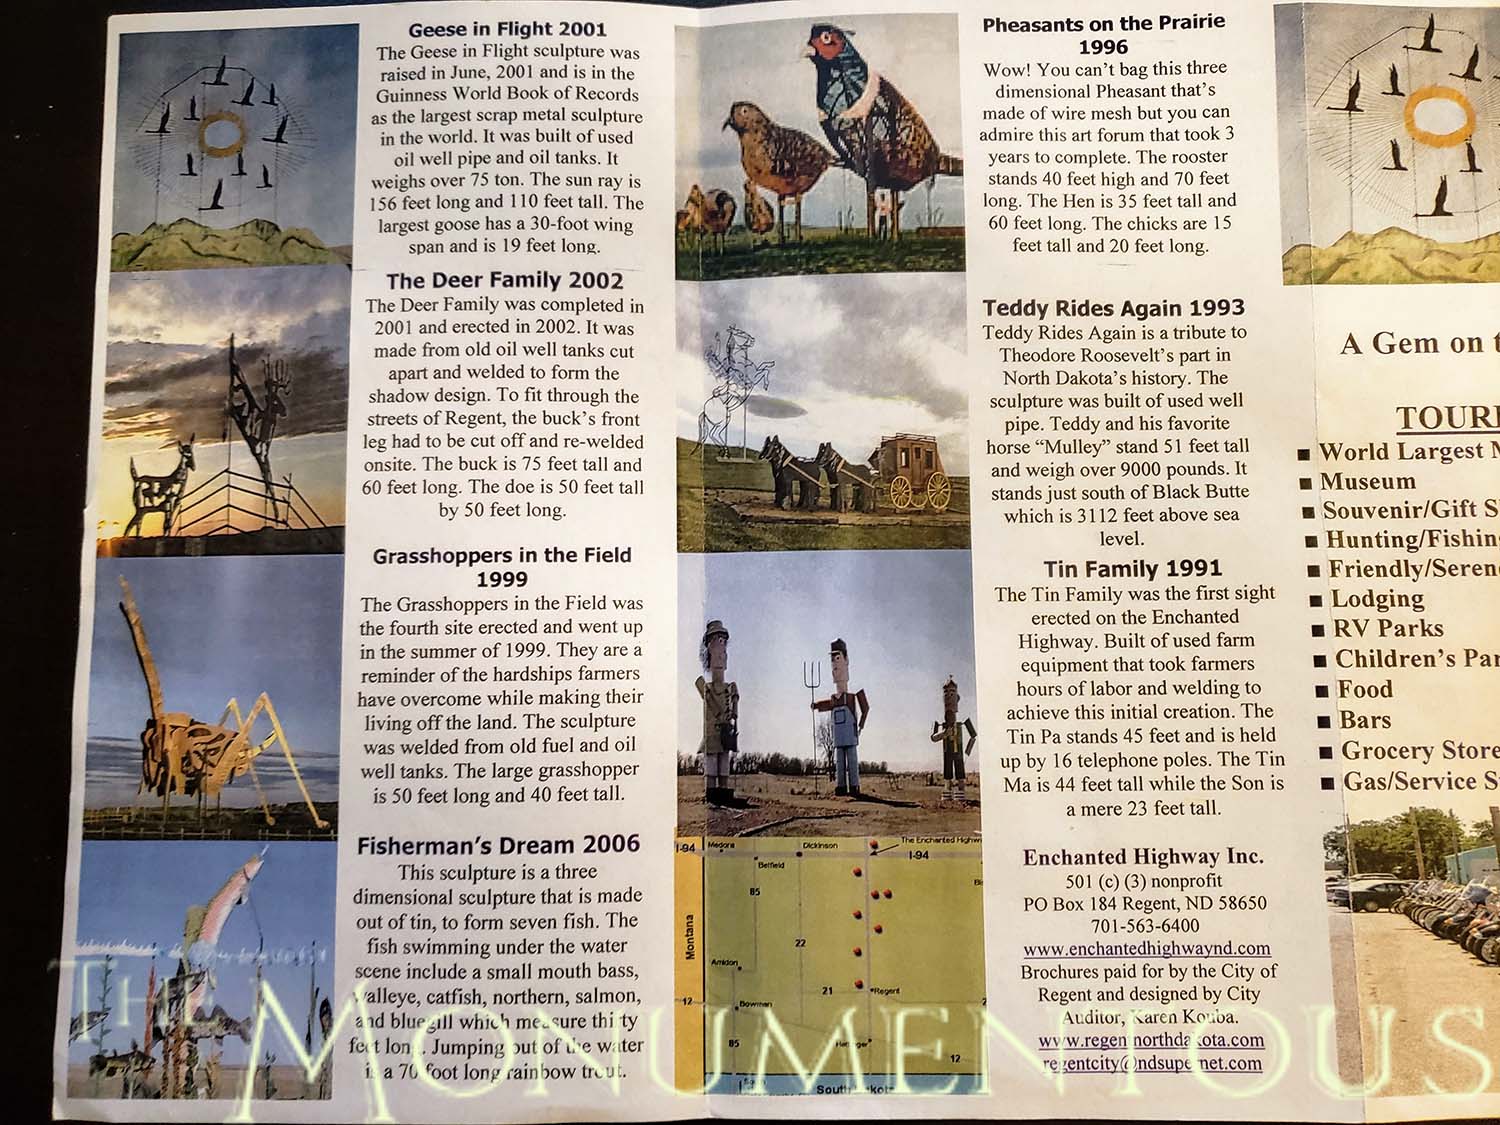 Enchanted Highway Features the World's Largest Scrap Sculptures - The